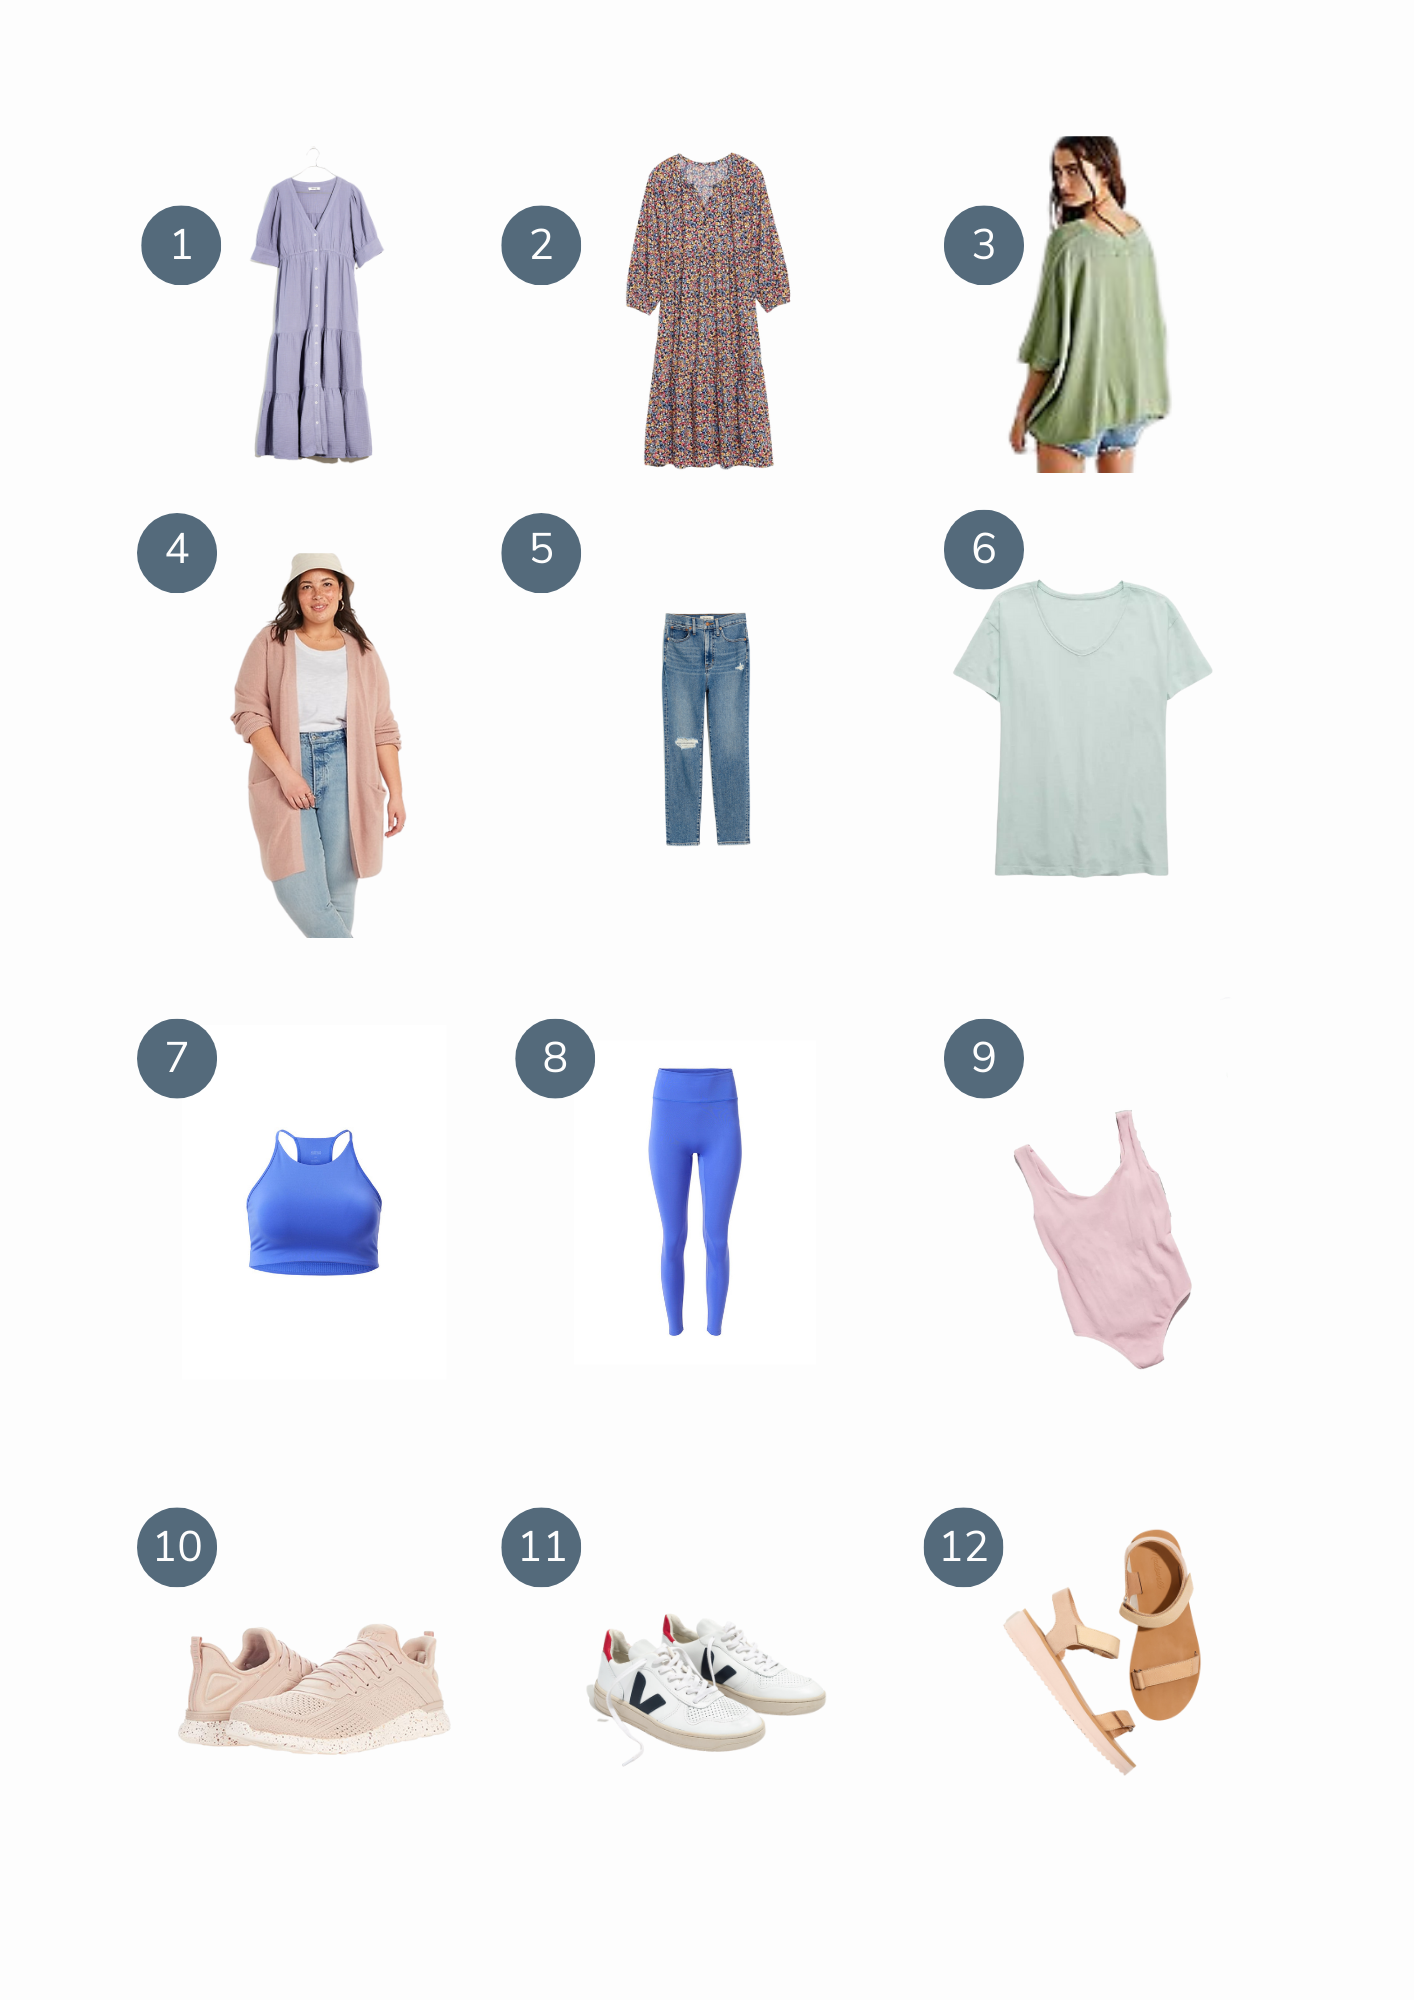 collage of pastel and brightly colored women's clothing options for spring